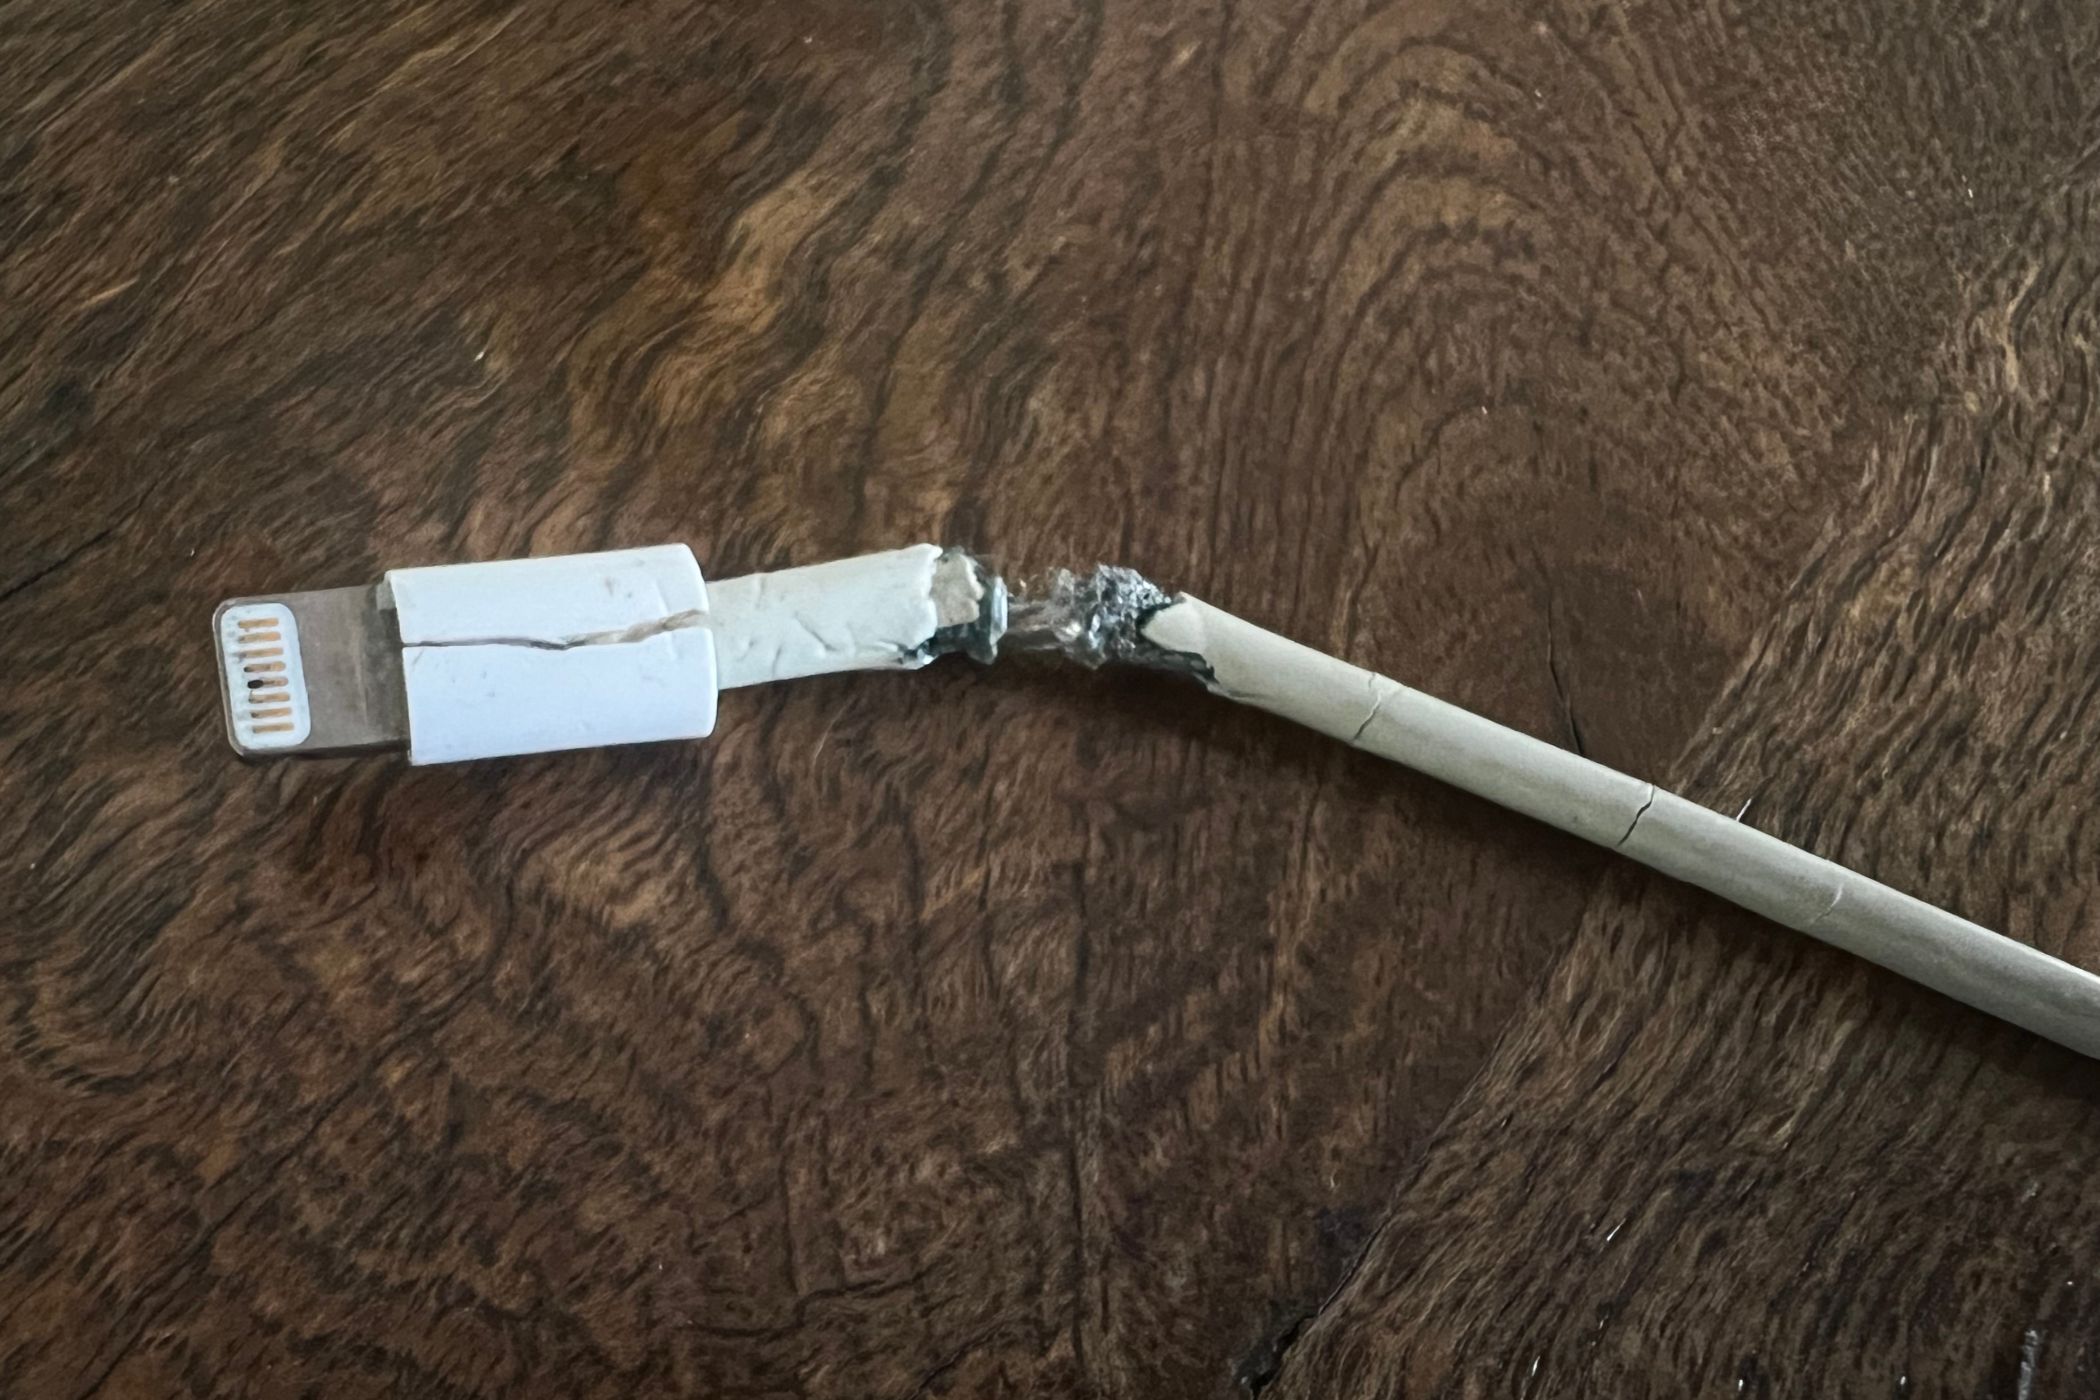 A cracked and frayed Lightning cable you definitely shouldn't use.